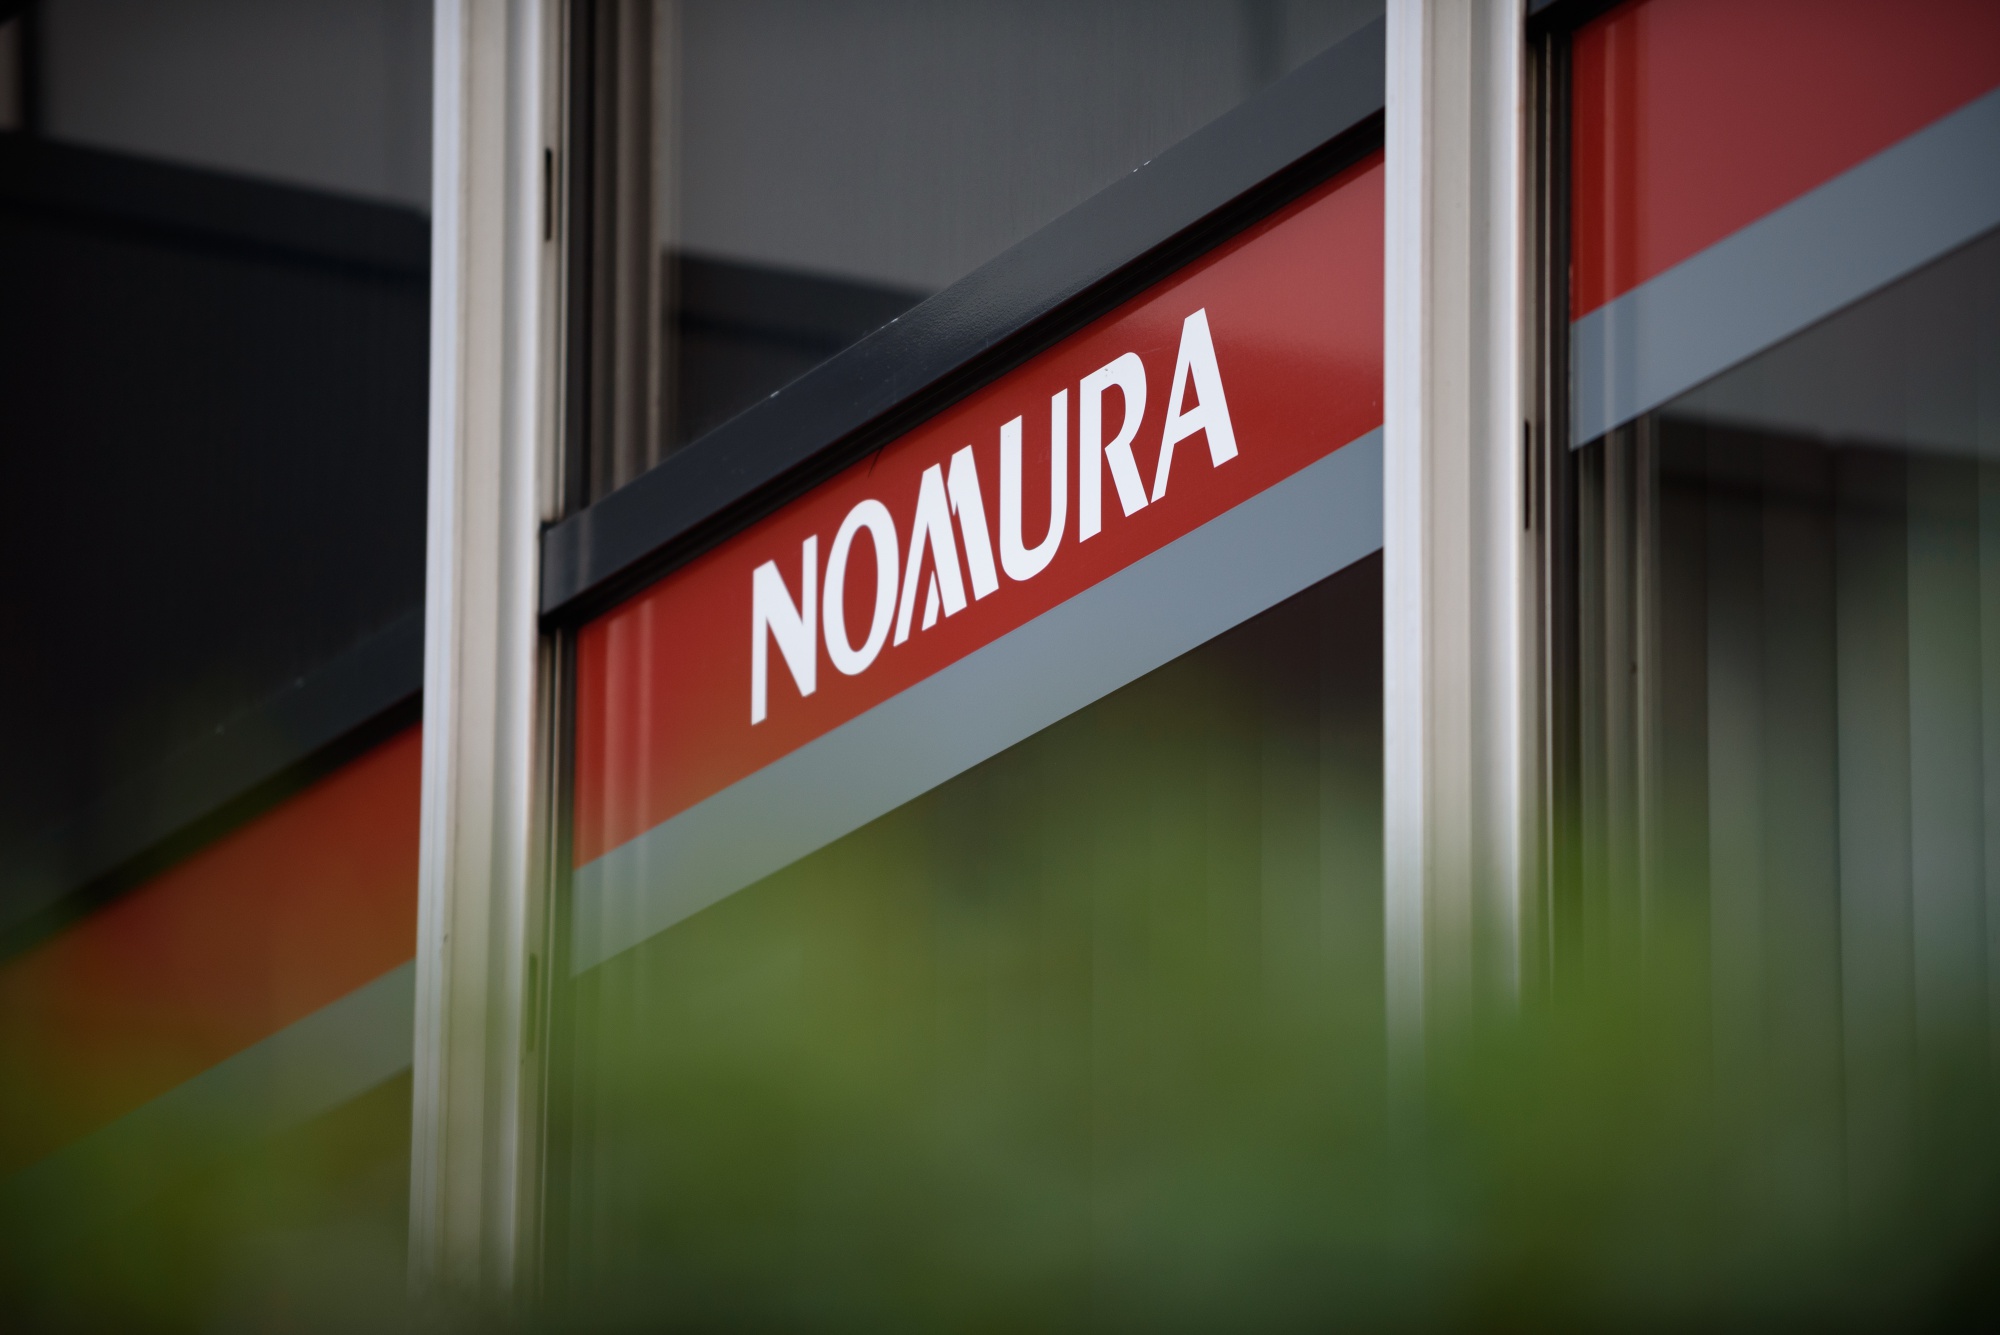 Views of Nomura and Other Financial Institutions Ahead of Earnings Report